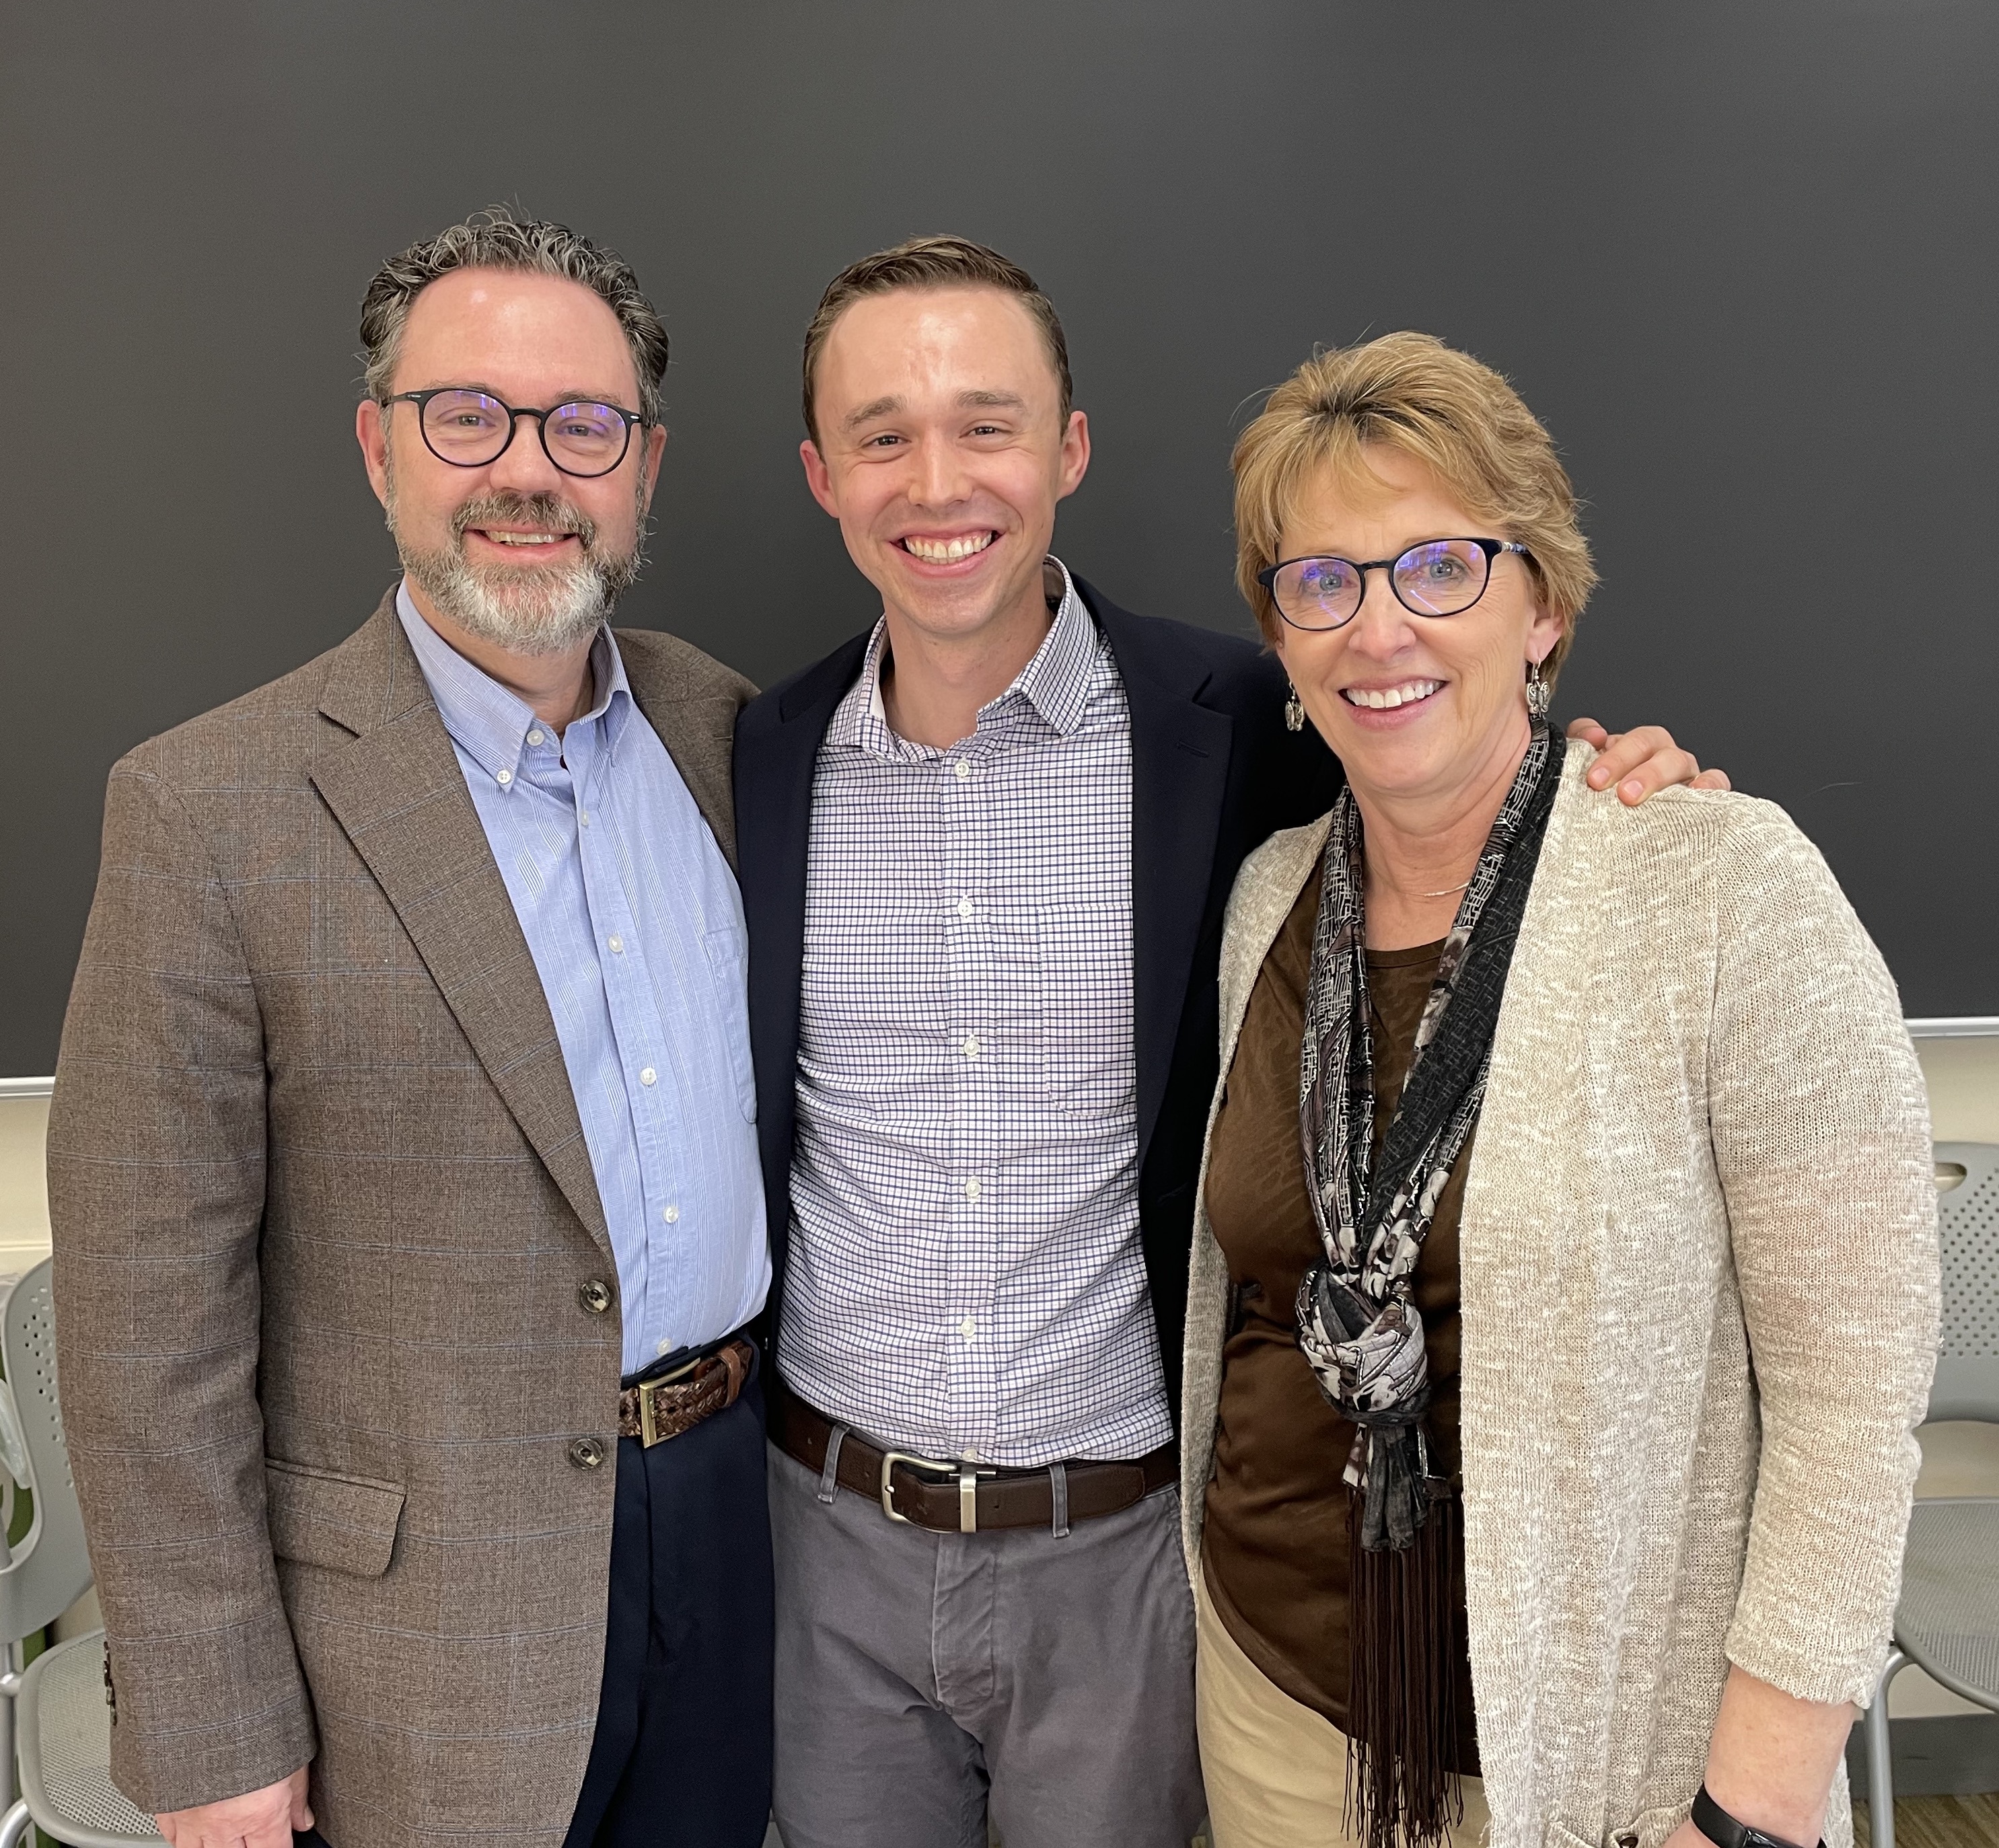 Photograph of Connor S. Kenaston, a scholar of U.S. history, with his parents, Joe and Judi Kenaston, after his dissertation defense. Photograph by Maria Niechwiadowicz.